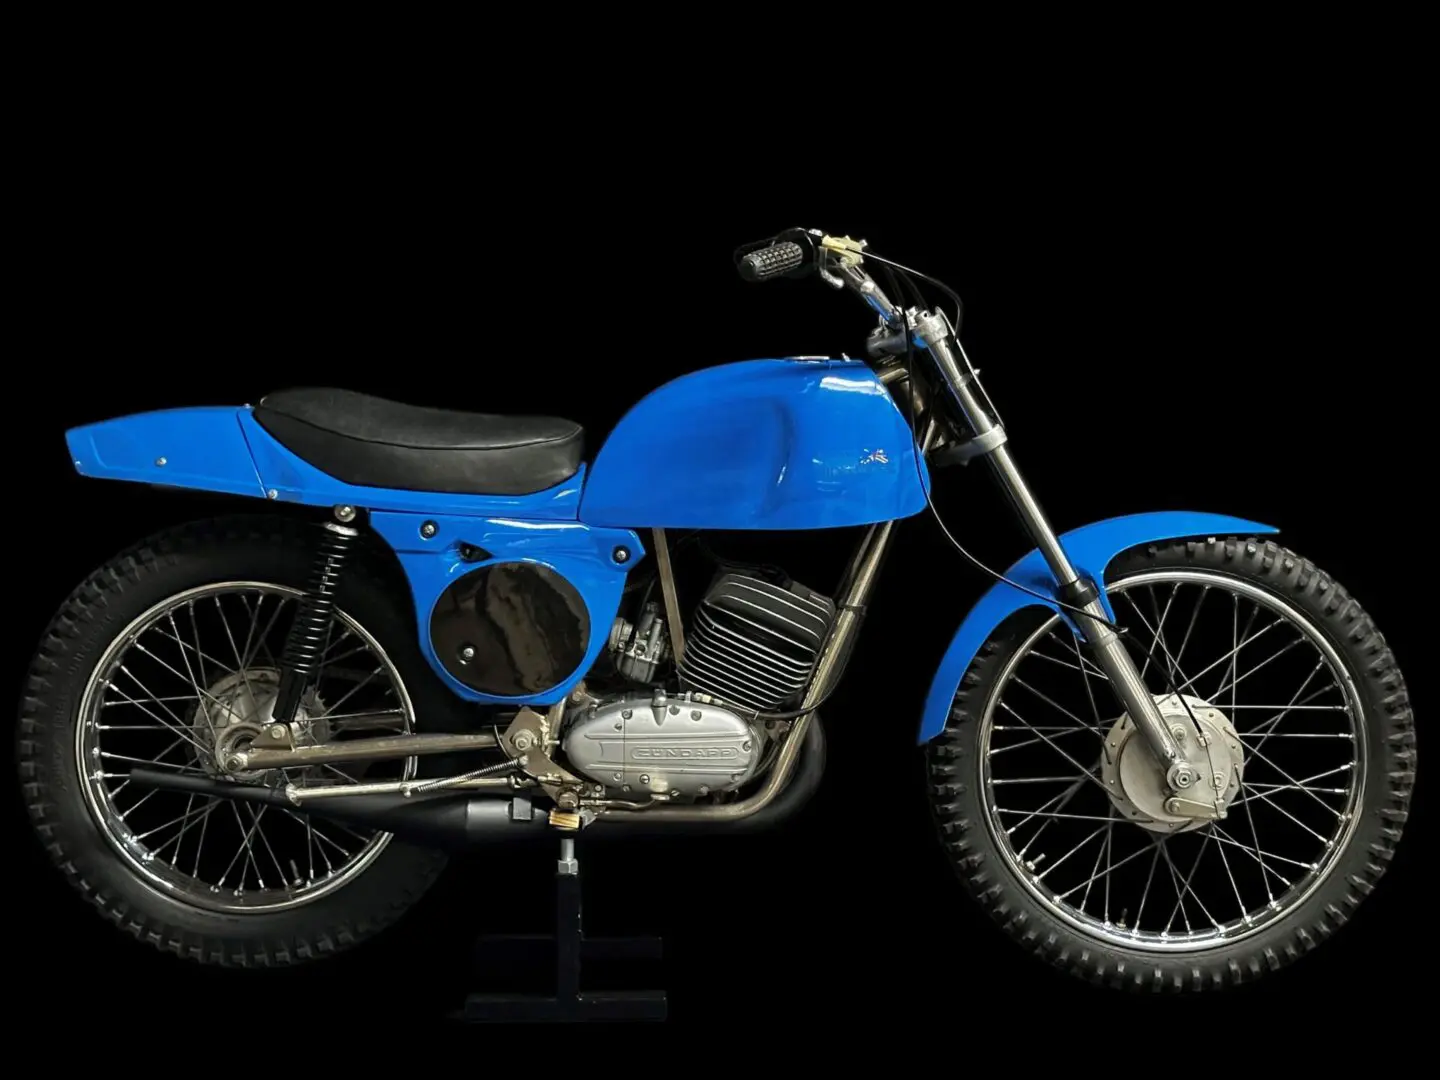 A Blue Color Bike With a Single Seat Image Section